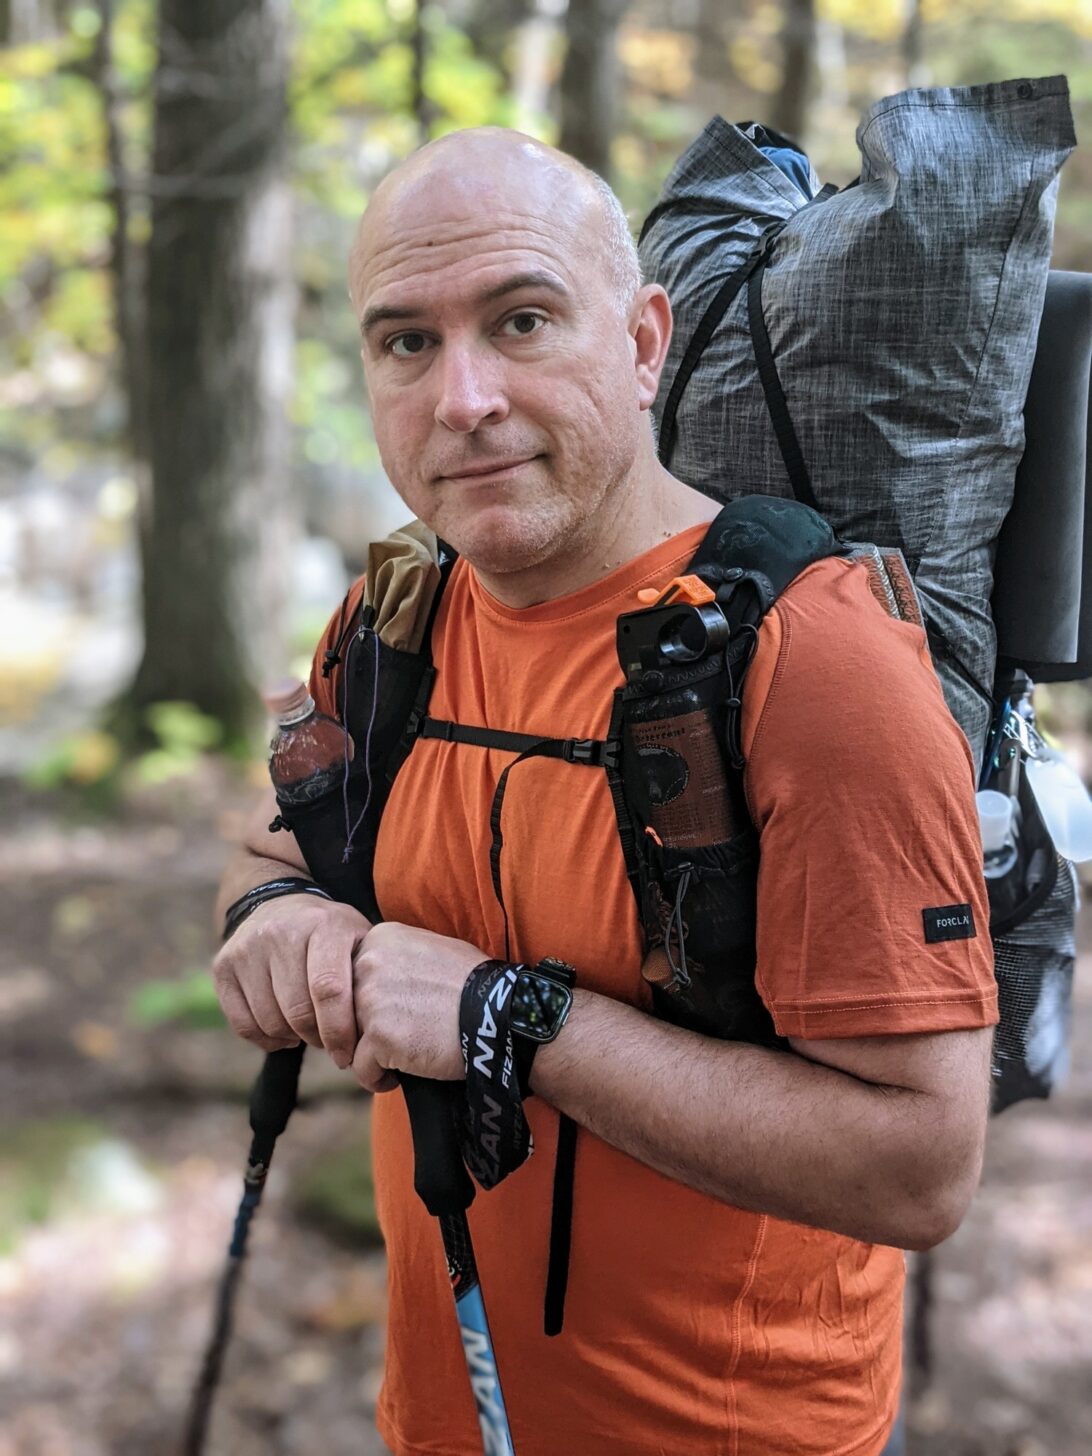 a medium shot of a man wearing a backpack with shoulder strap pockets. The shoulder strap pockets contain gear and a water bottle.